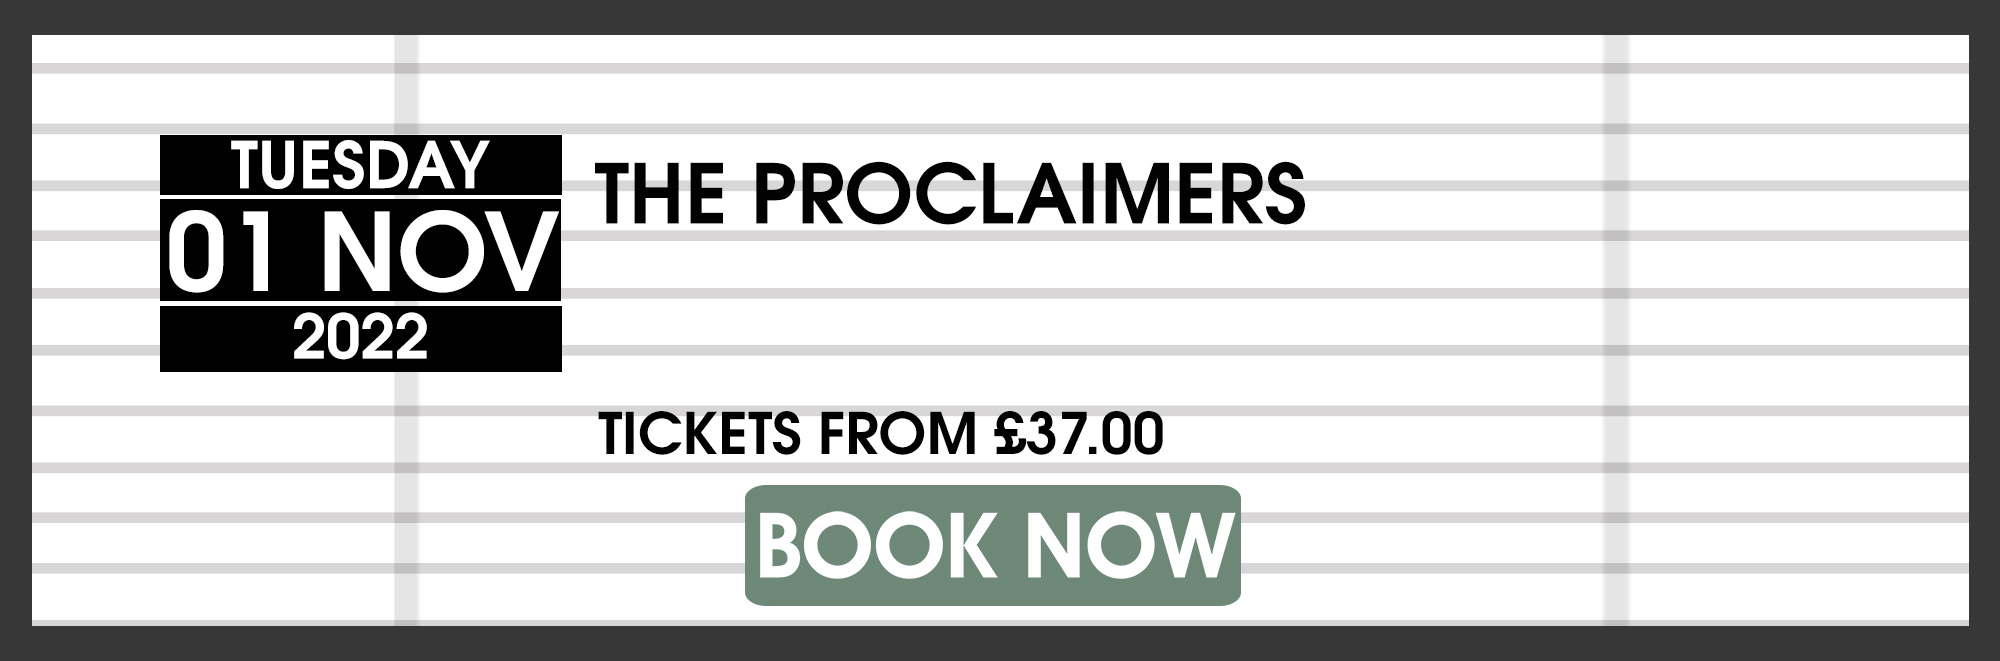 01.11.22 PROCALIMERS BOOK NOW